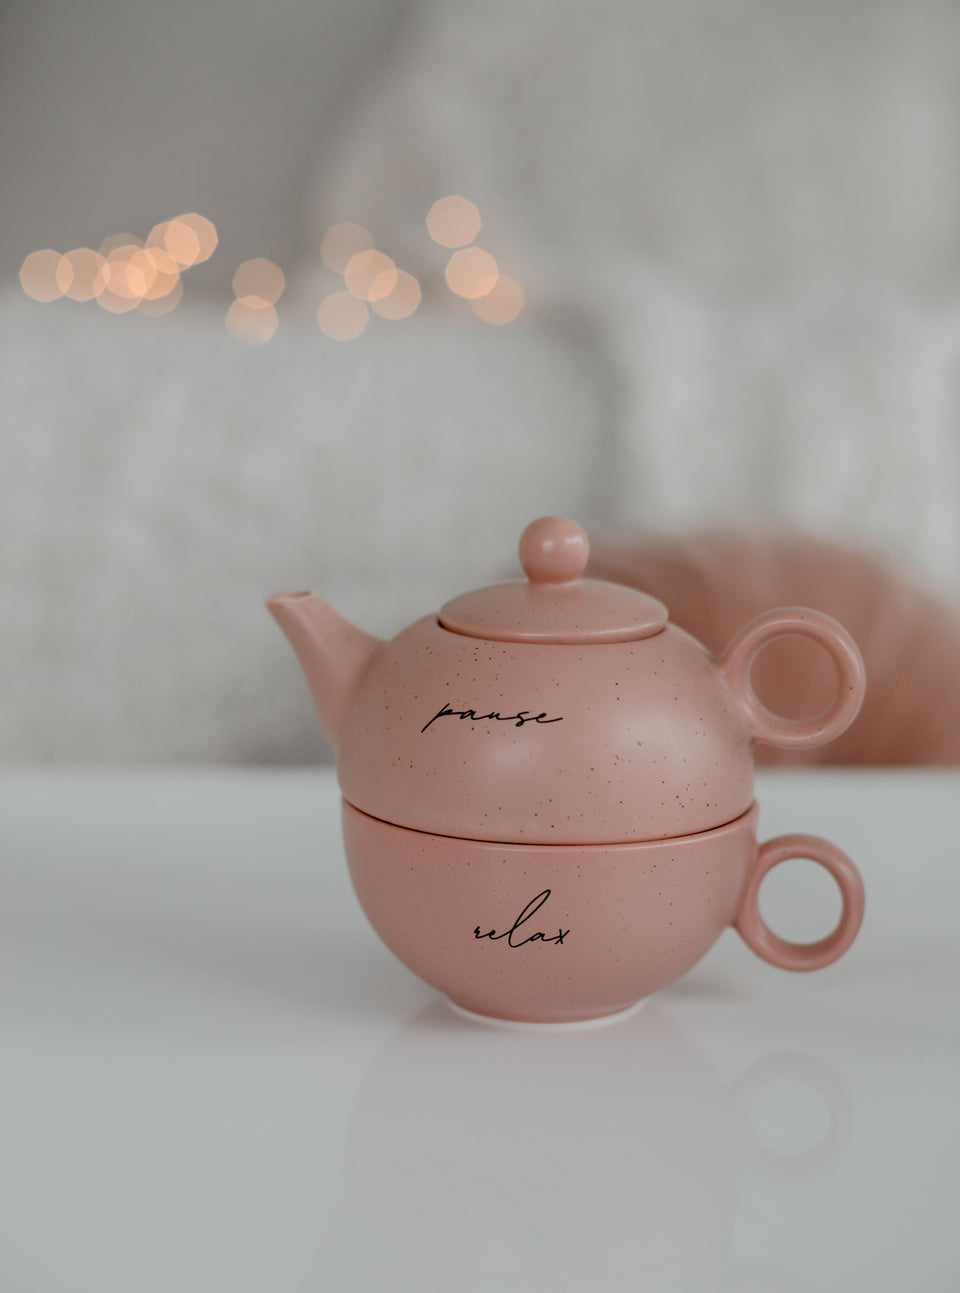 files/pink-teapot-with-pause-and-relax-written.jpg